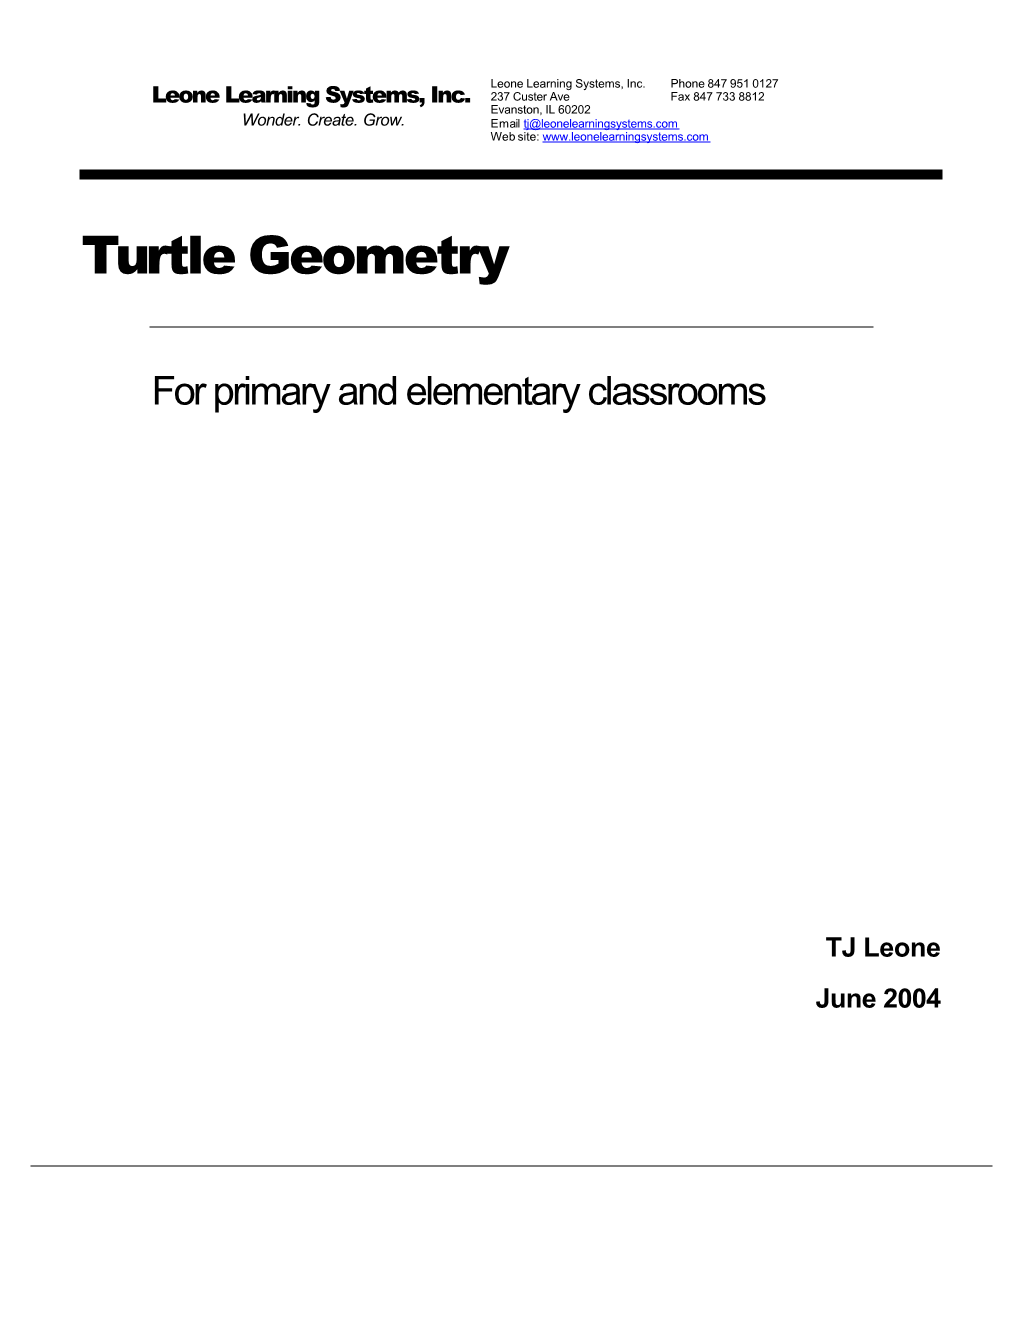 Turtle Geometry for Primary and Elementary Classrooms